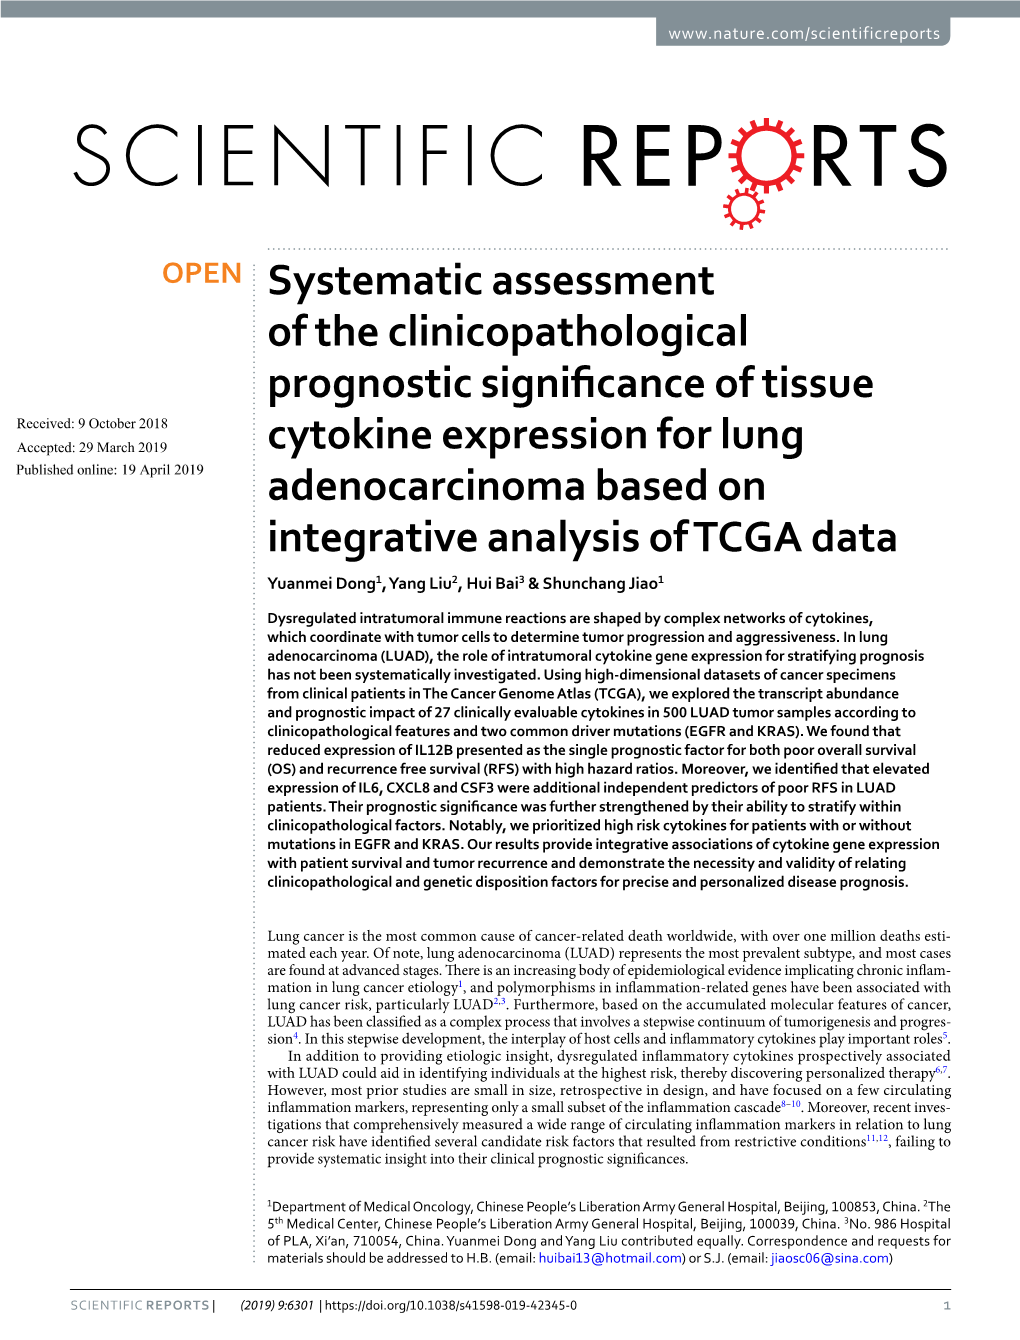 Systematic Assessment of the Clinicopathological Prognostic